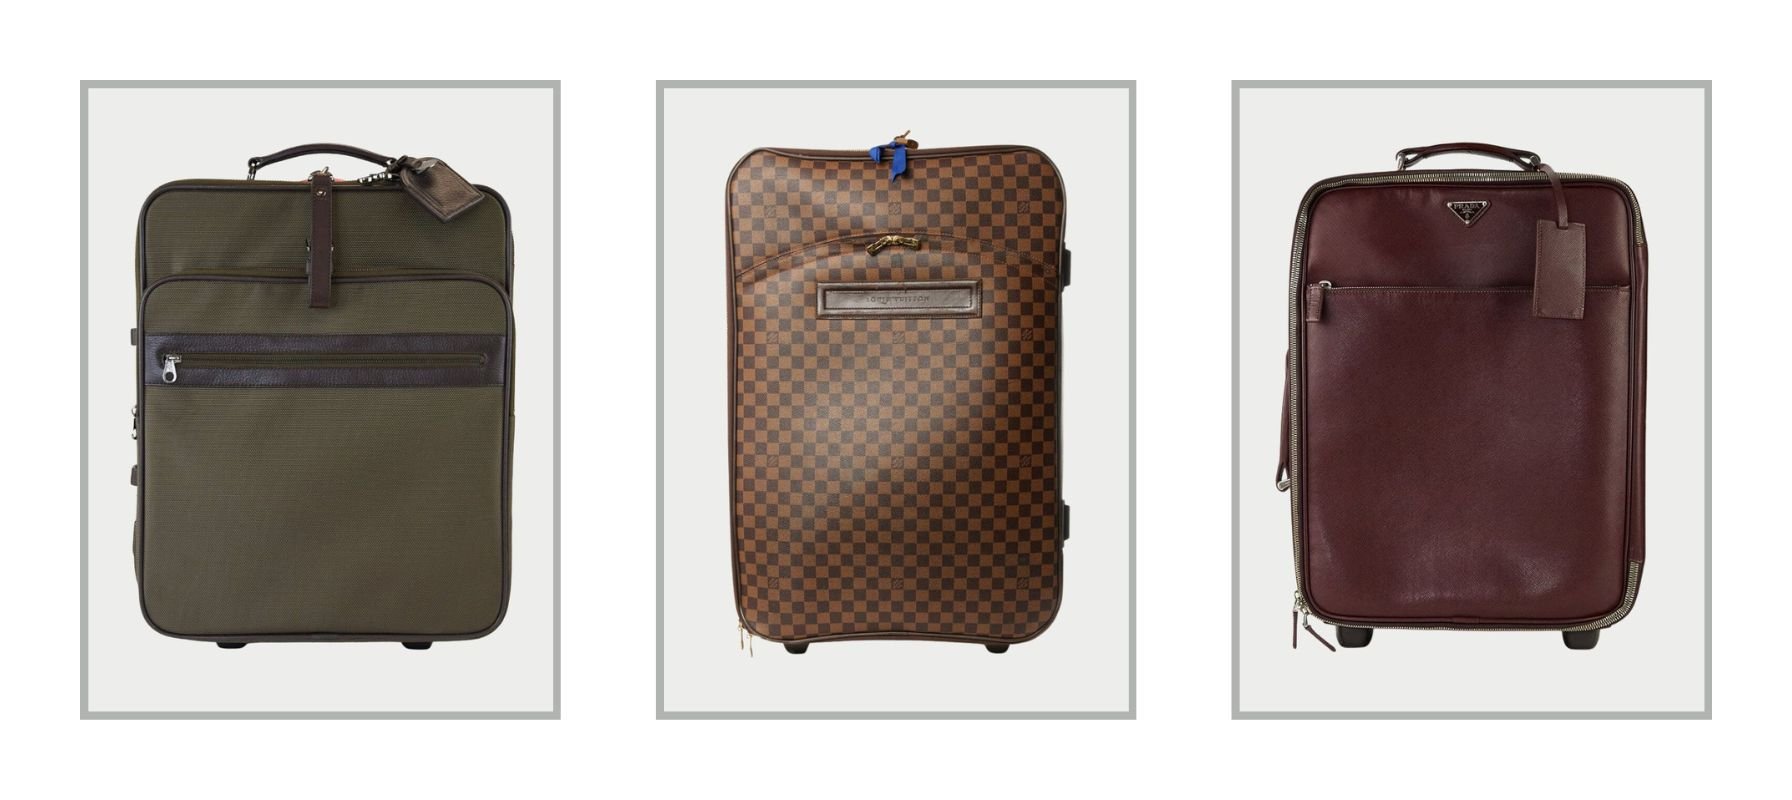 Shop our Travel Essentials: Suitcases at The Handbag Clinic today